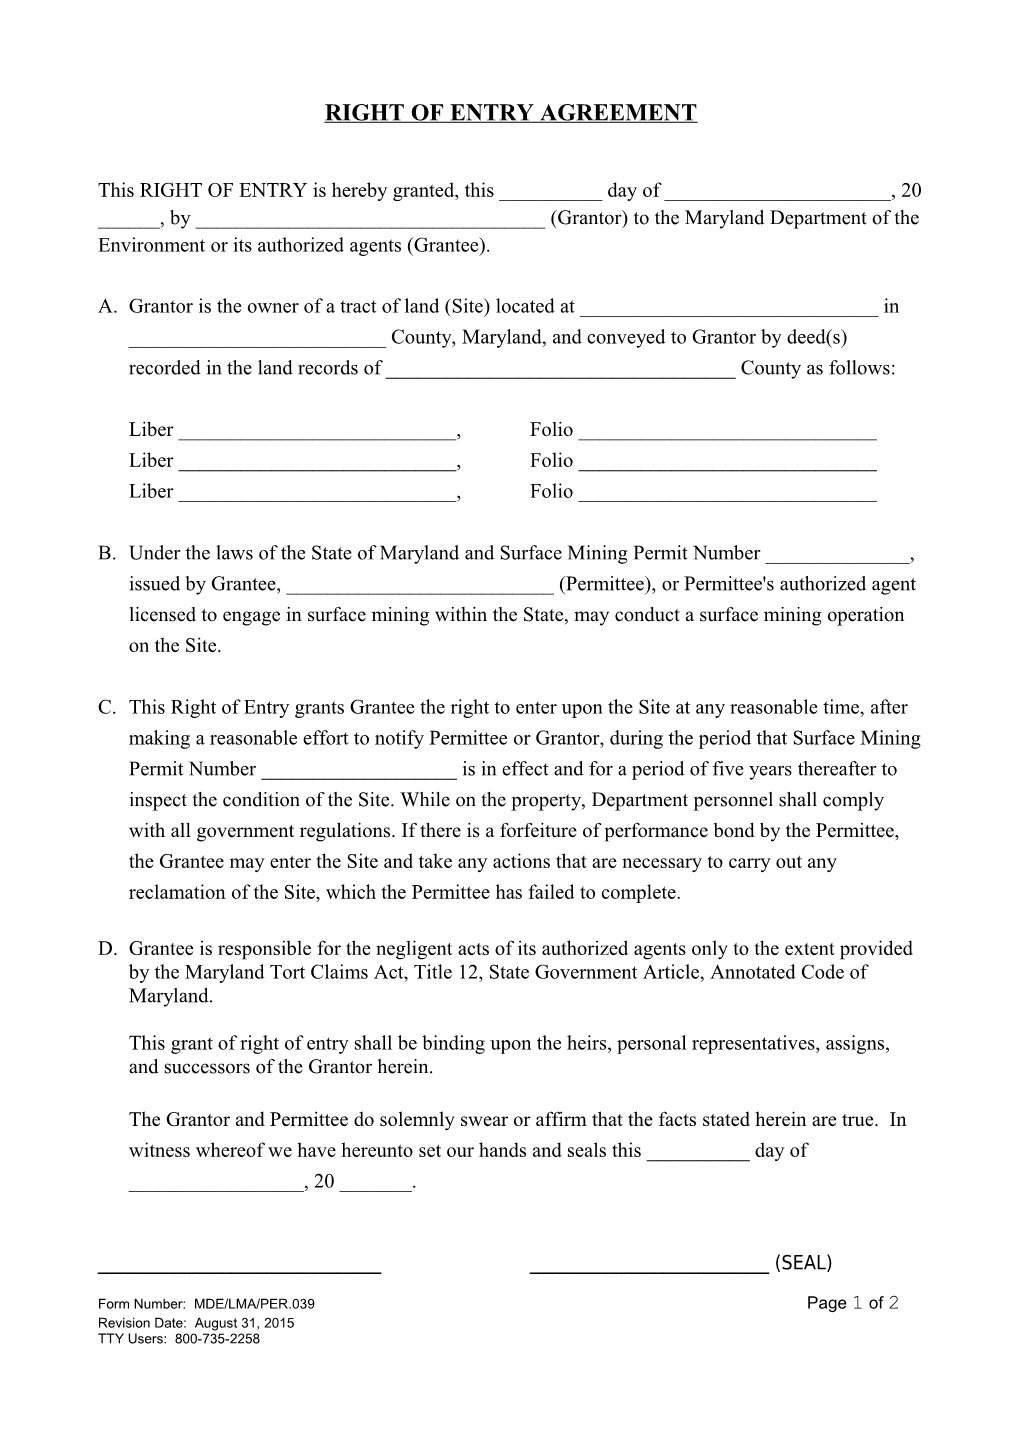 Right of Entry Agreement Form